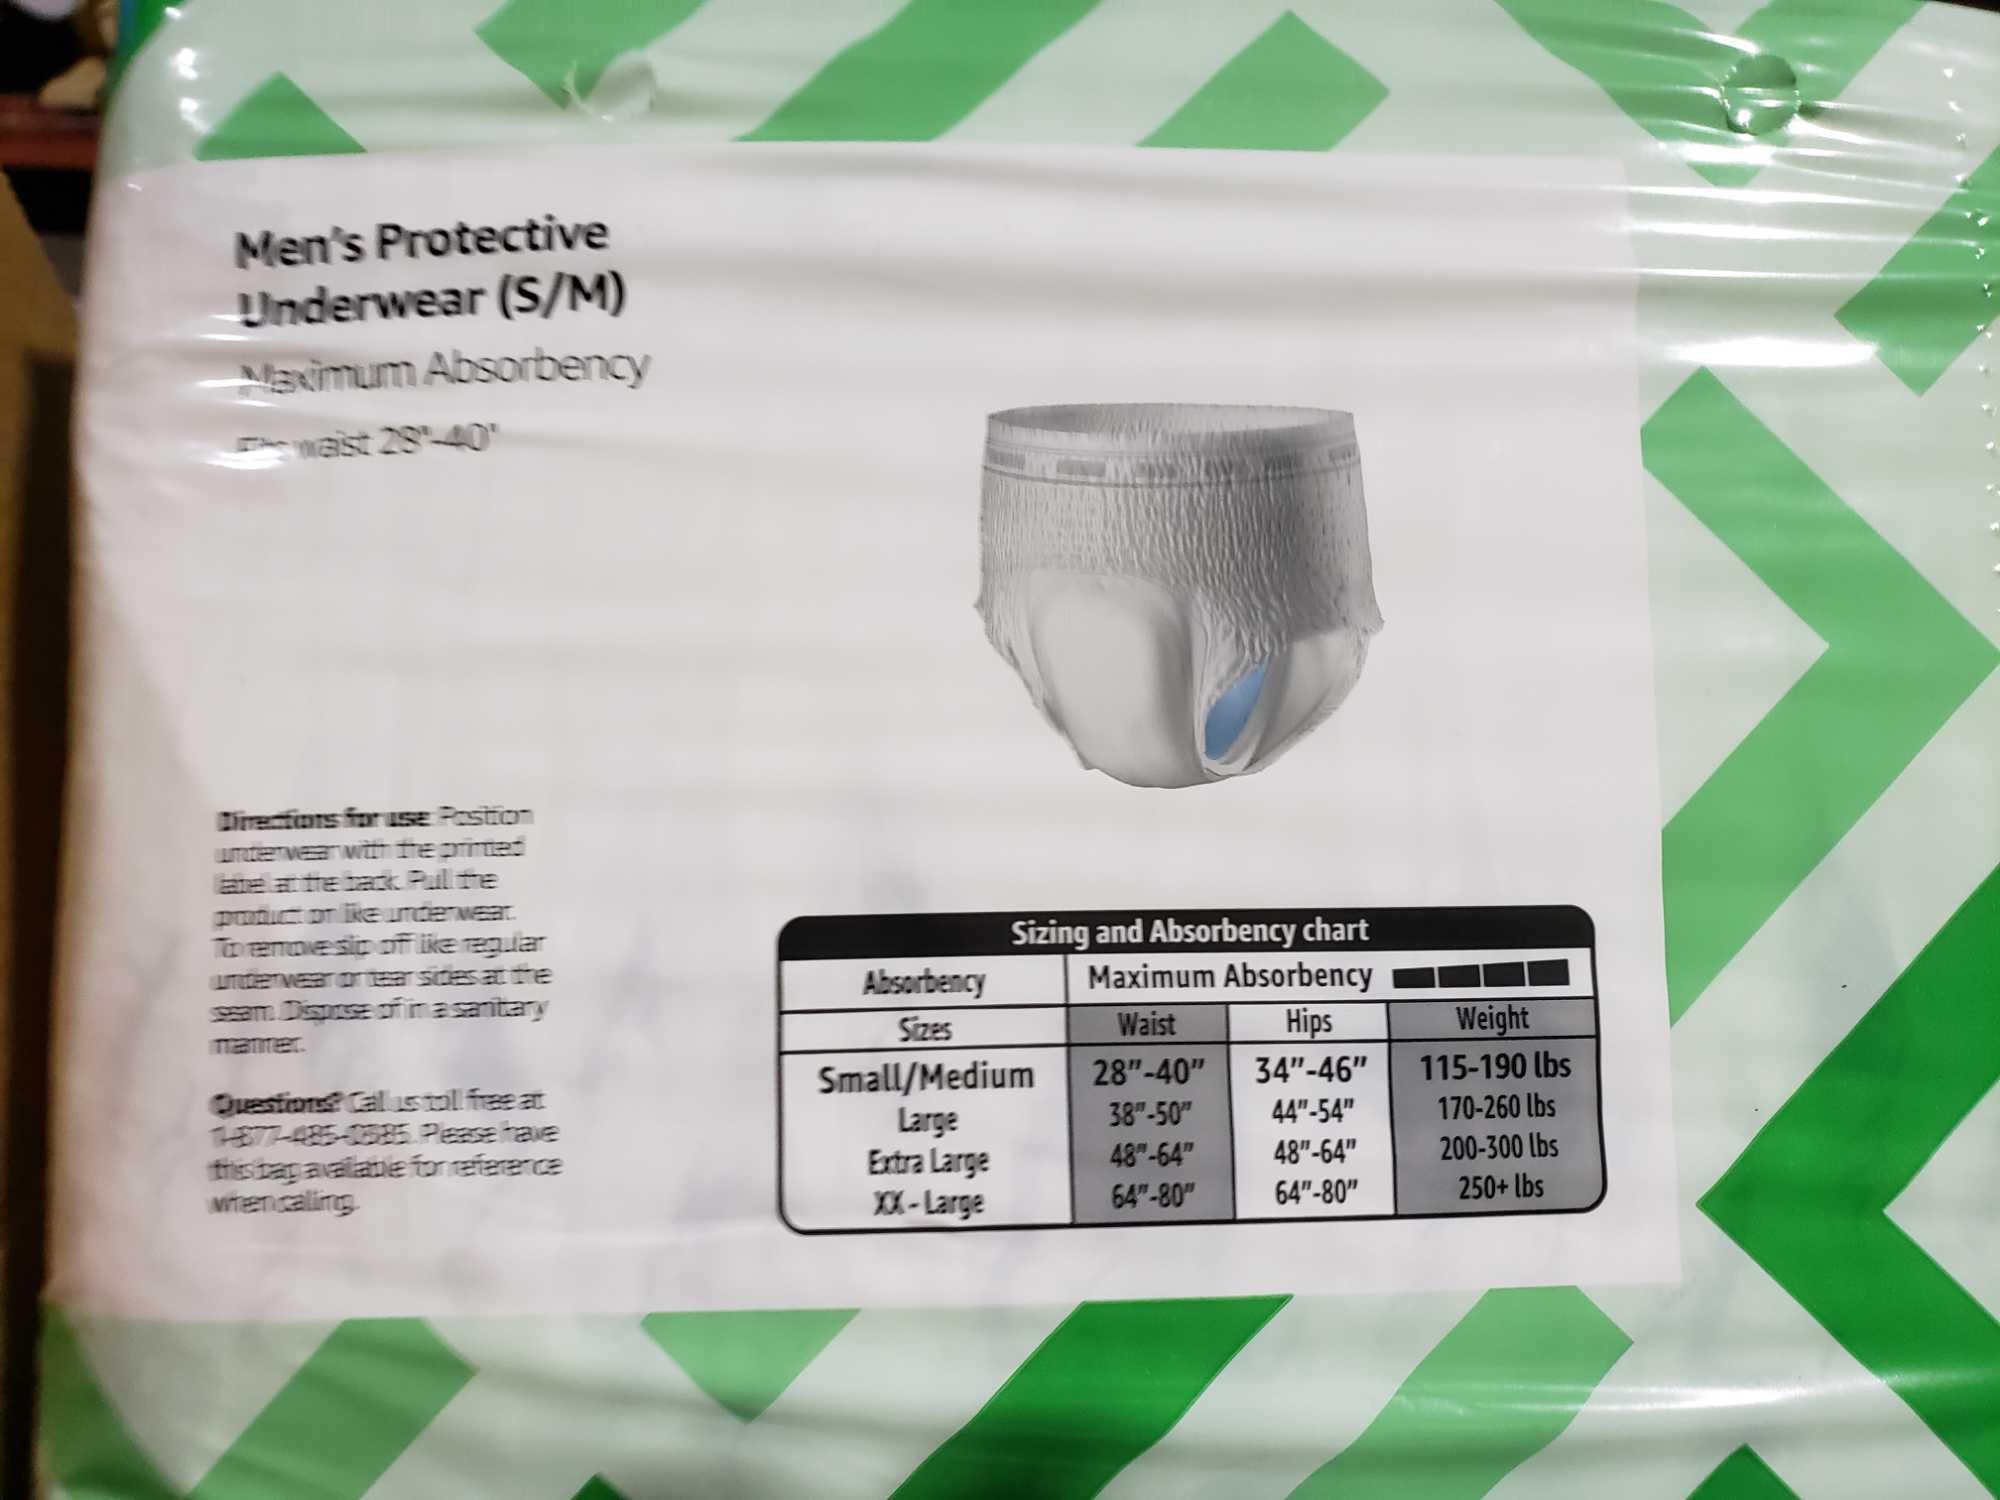 Solimo Incontinence Underwear ; Depend Incontinence Guards for Men; Depend Protection with Tabs Max